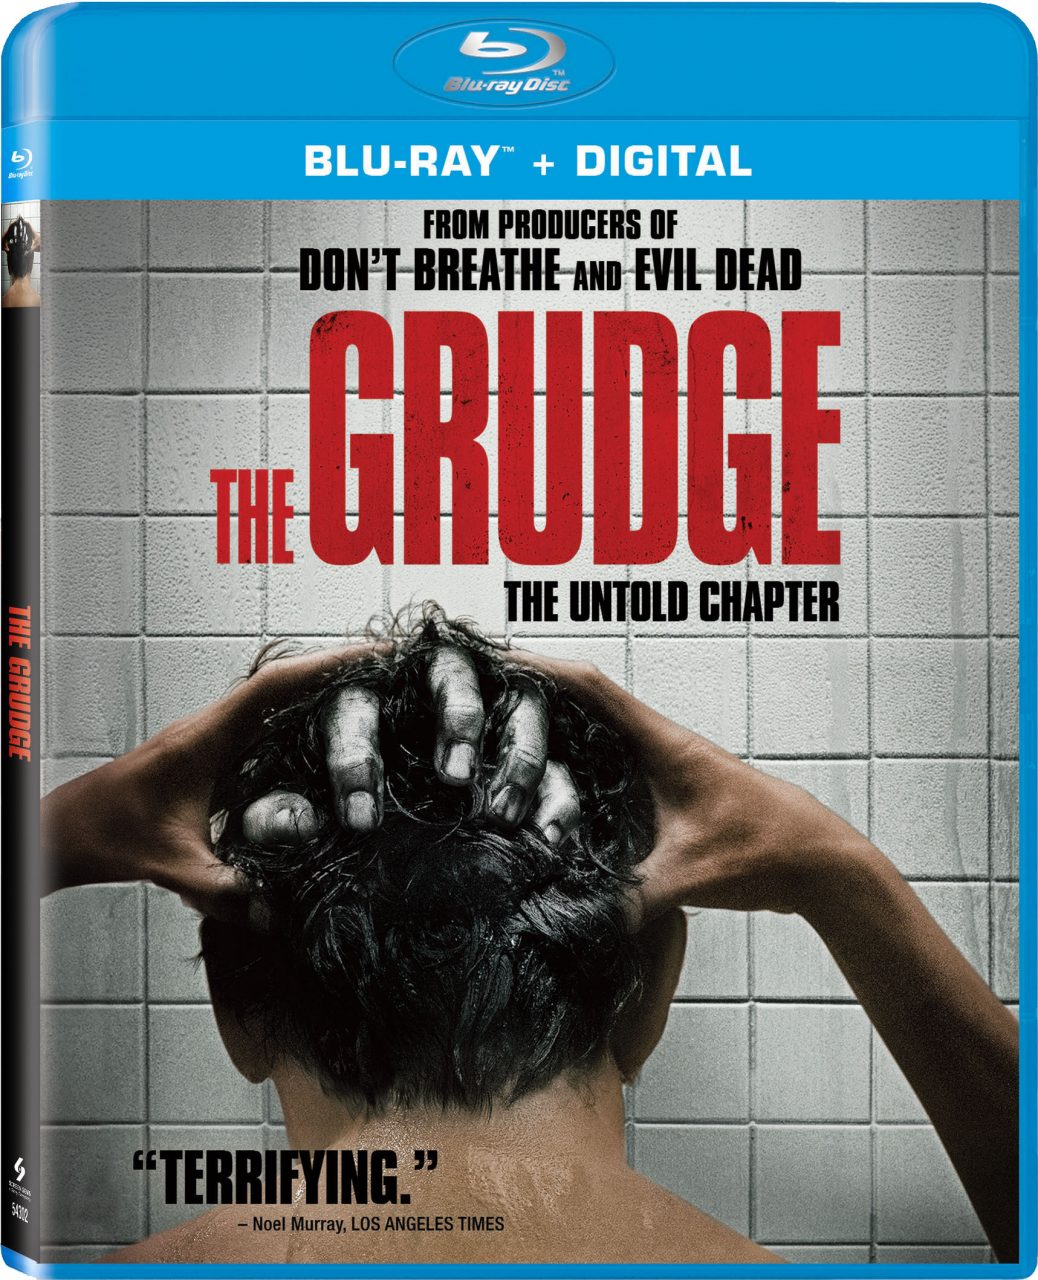 The Grudge Blu-Ray Combo Pack cover (Lionsgate Home Entertainment)